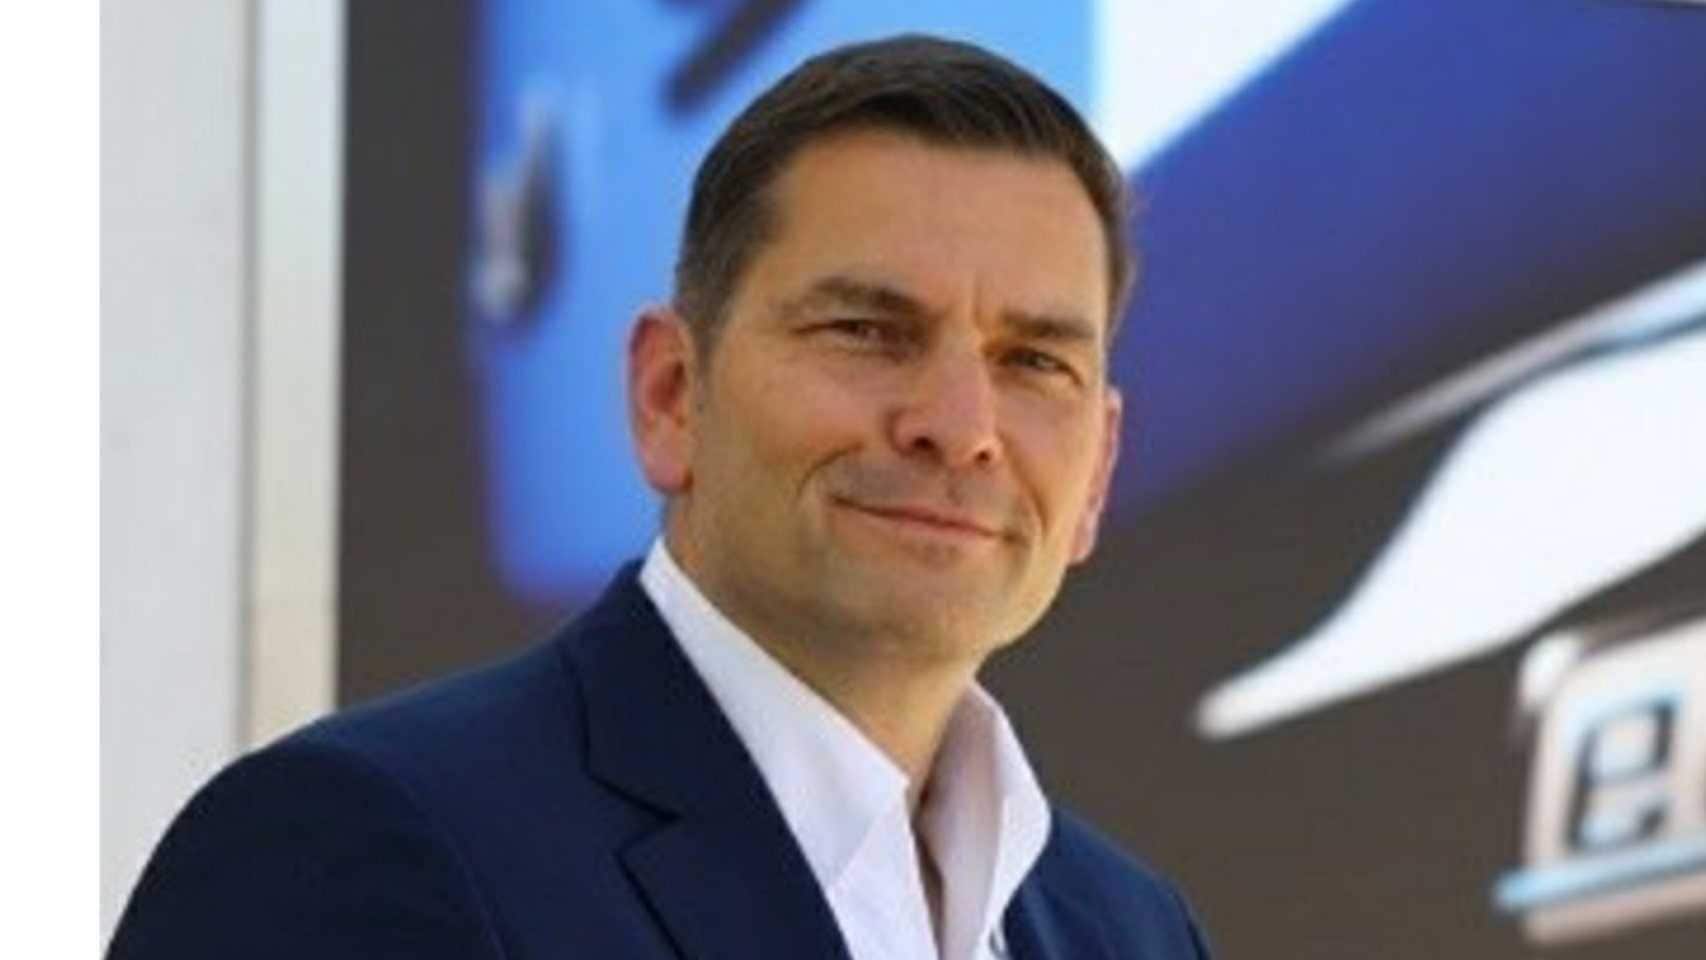  Marc Llistosella appointed Tata Motors MD and CEO; to take over from July 1, 2021